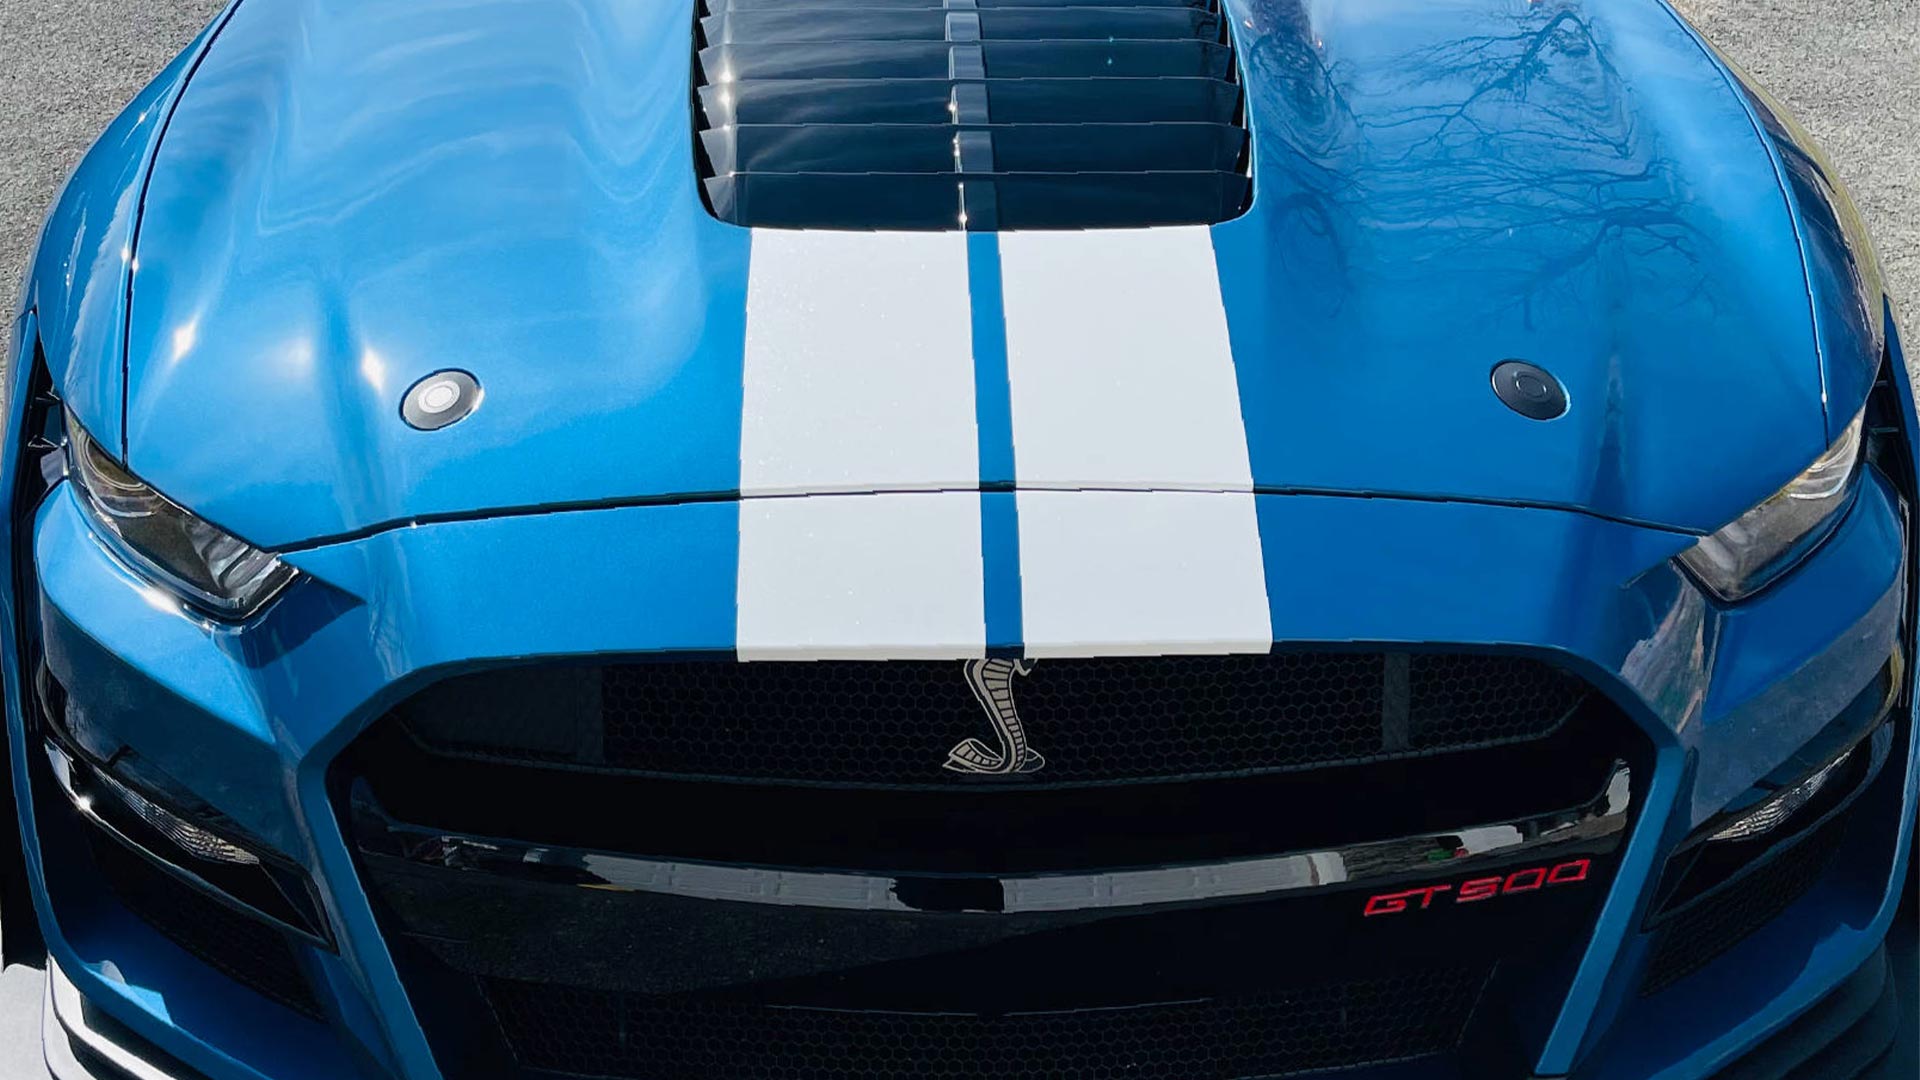 is paint correction worth the investment